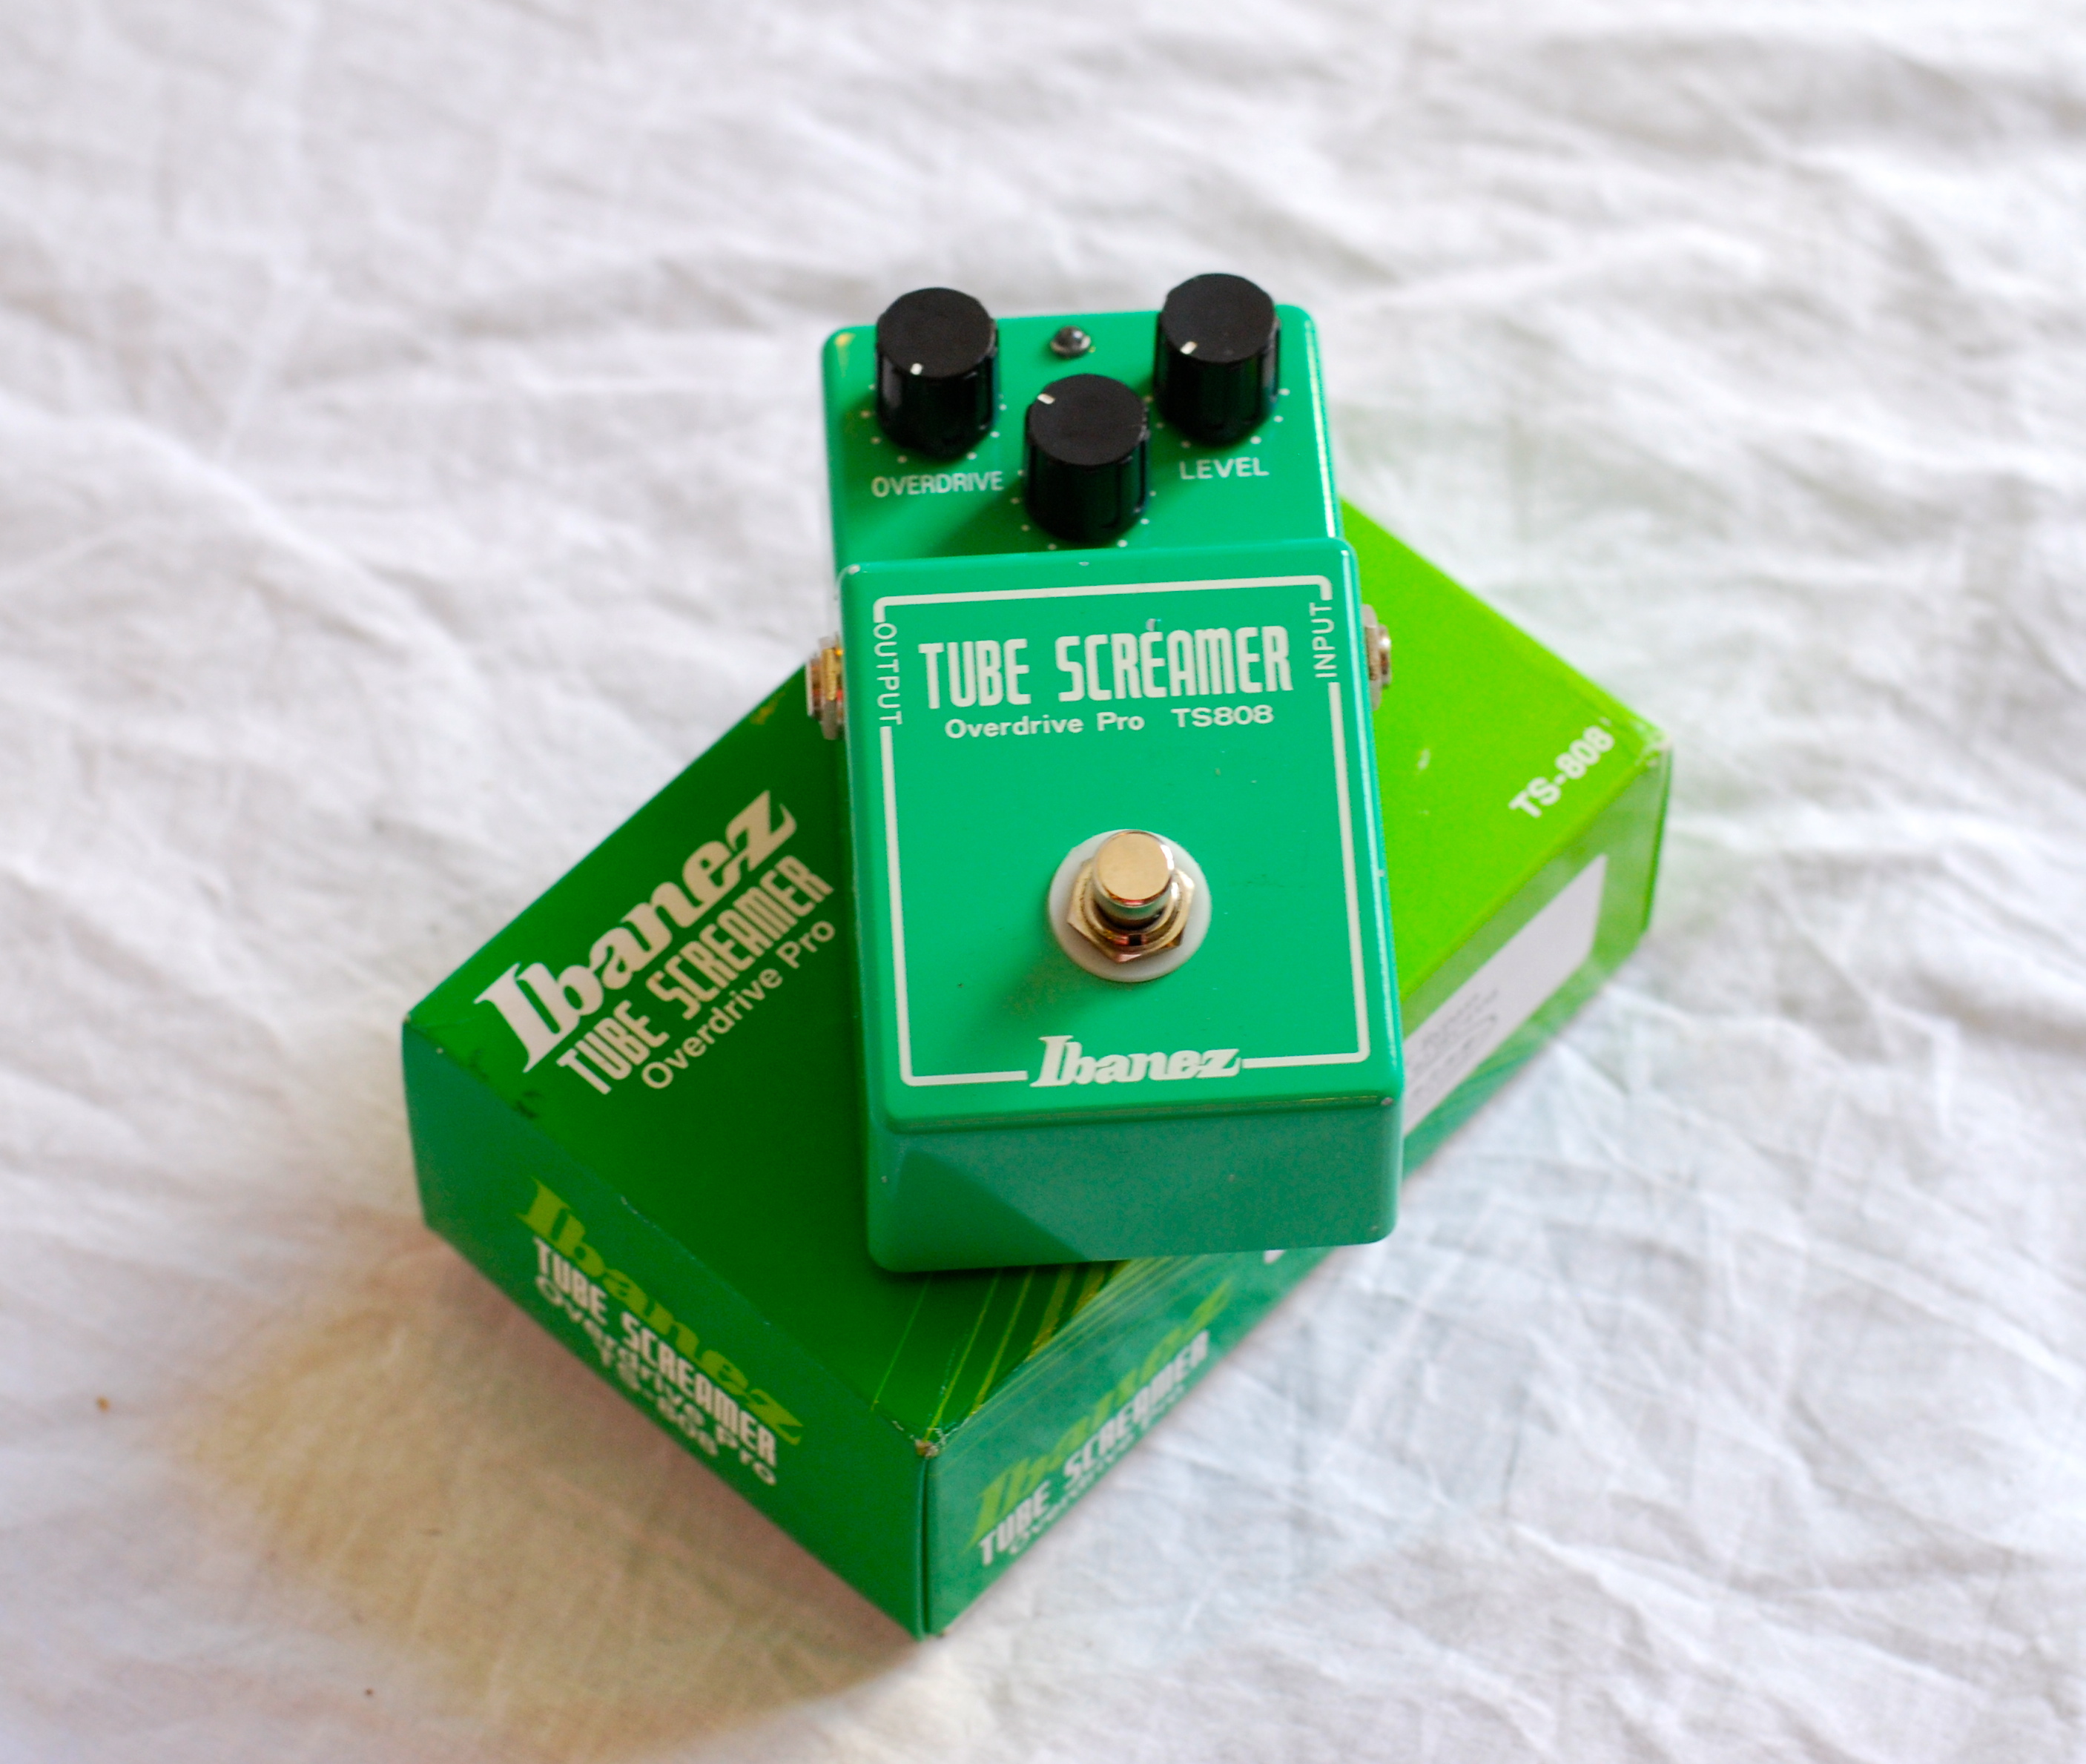 Ibanez TS808 Tube Screamer - Modded by Keeley image (#585926